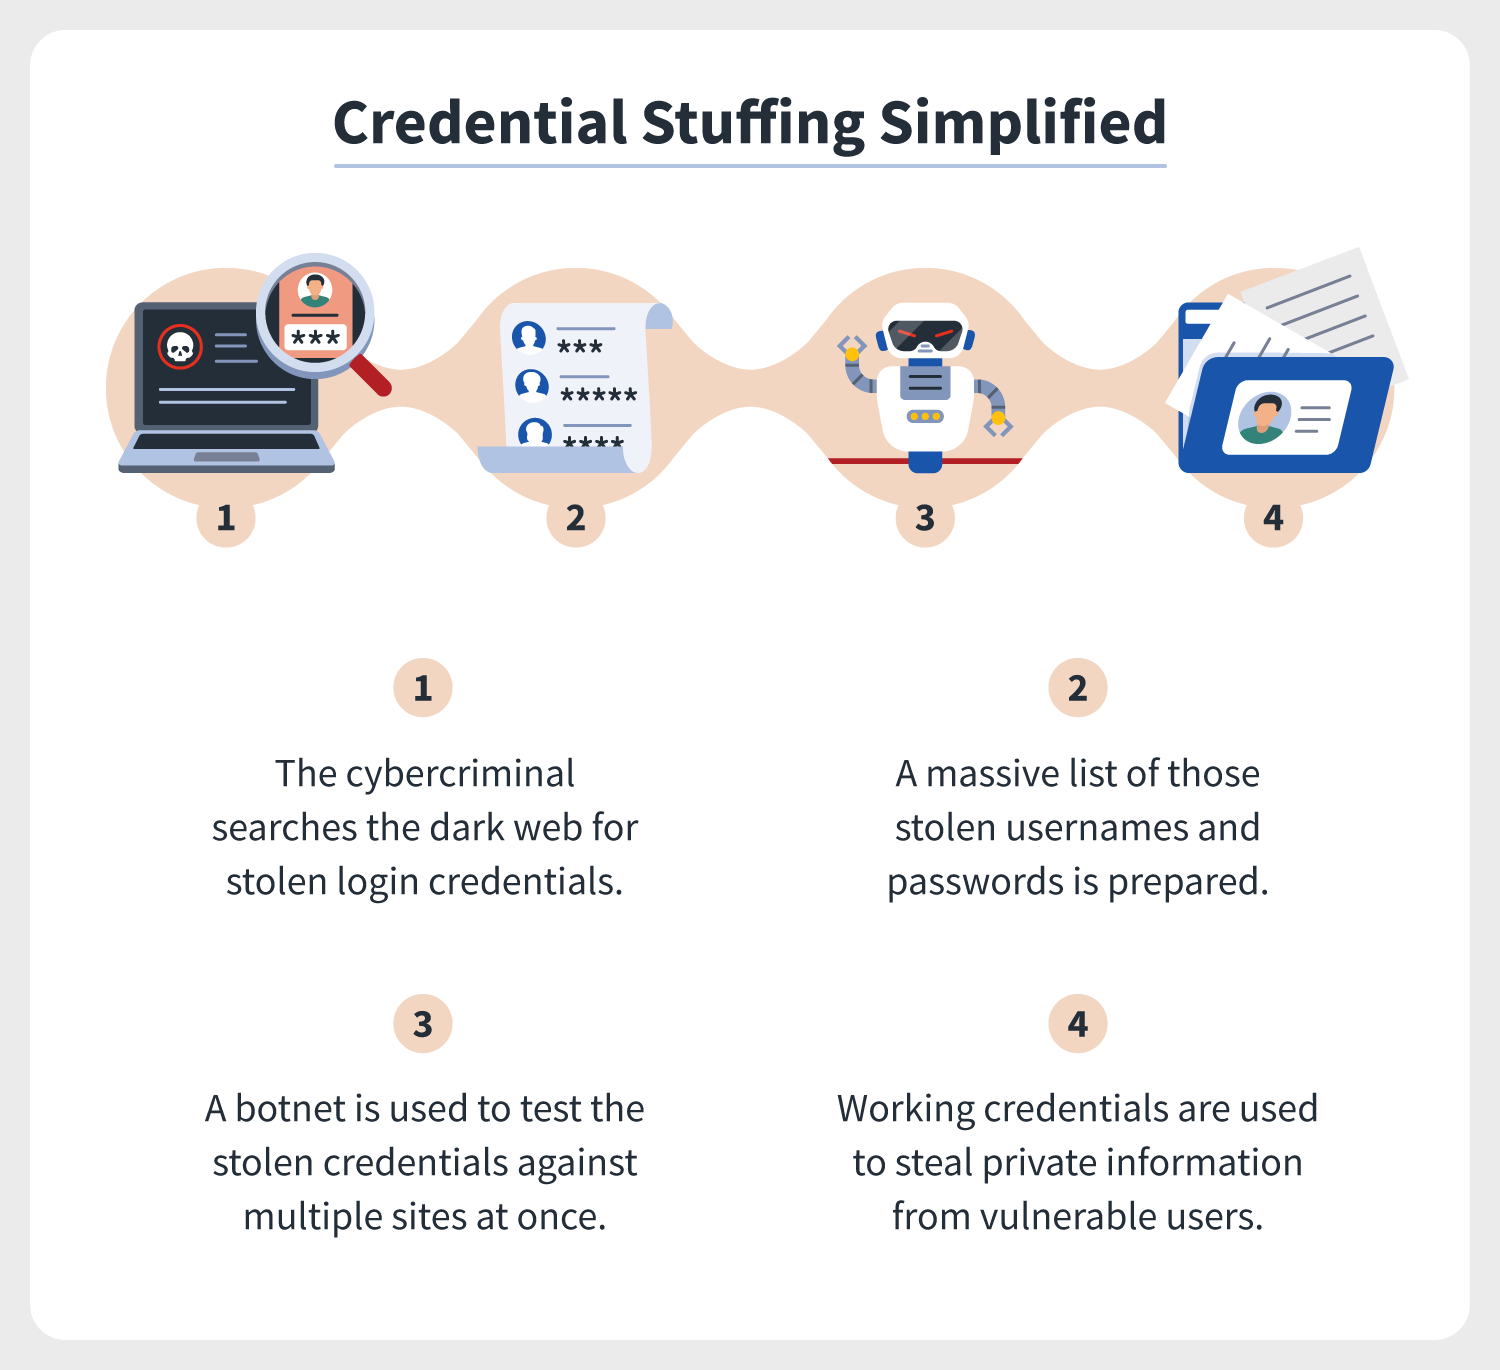 A computer, document, botnet, and wallet icon indicate the steps used by cybercriminals to carry out credential stuffing attacks.  